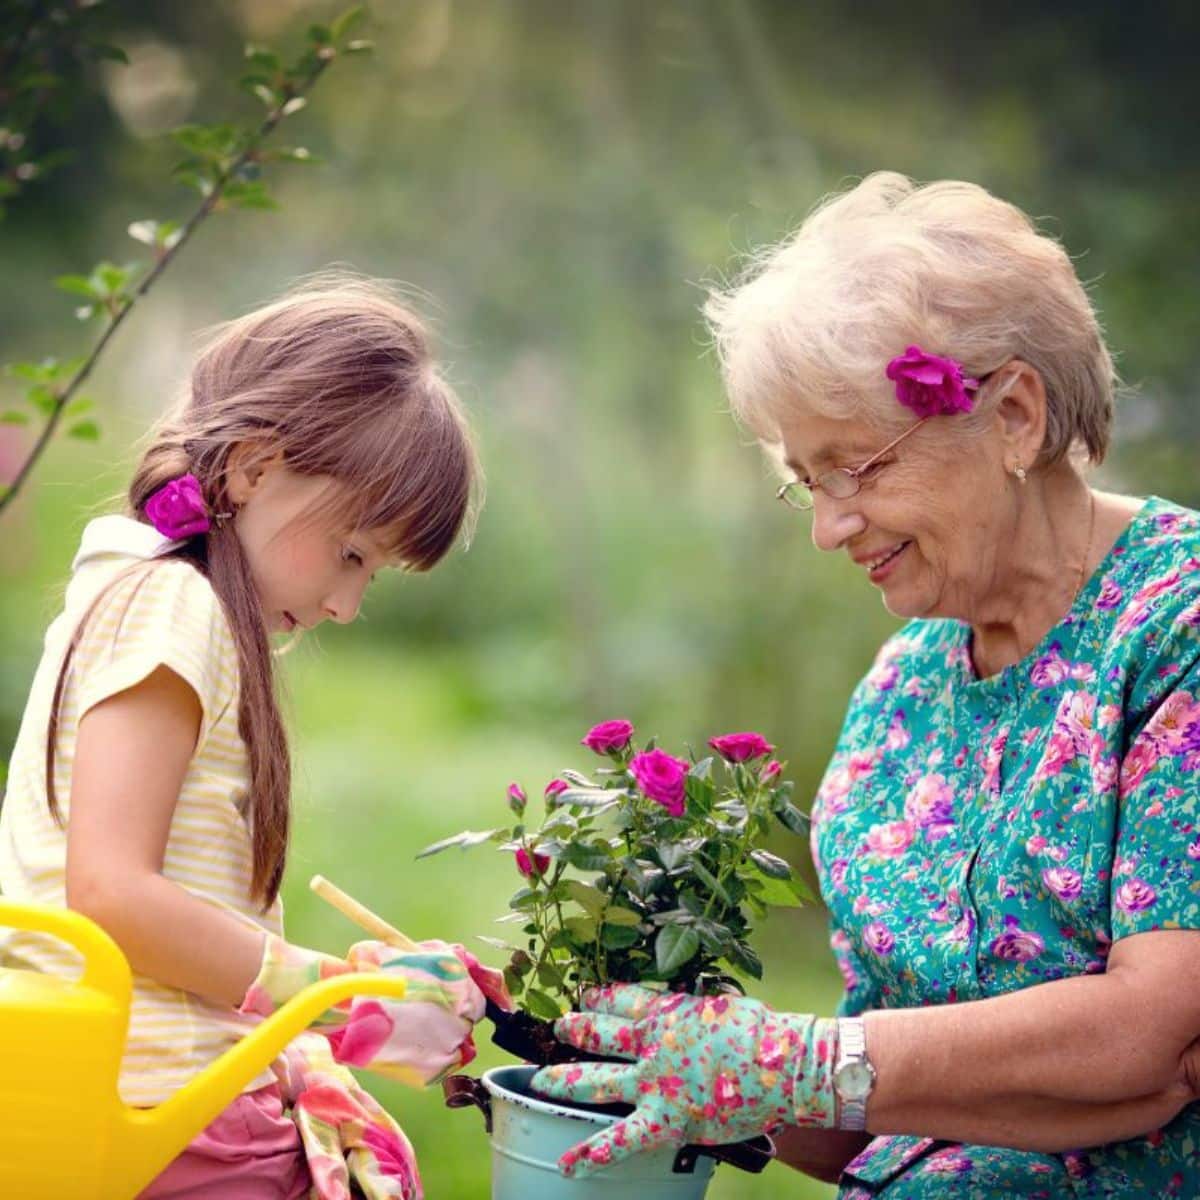 Young girl helping an elderly woman plant flowers.